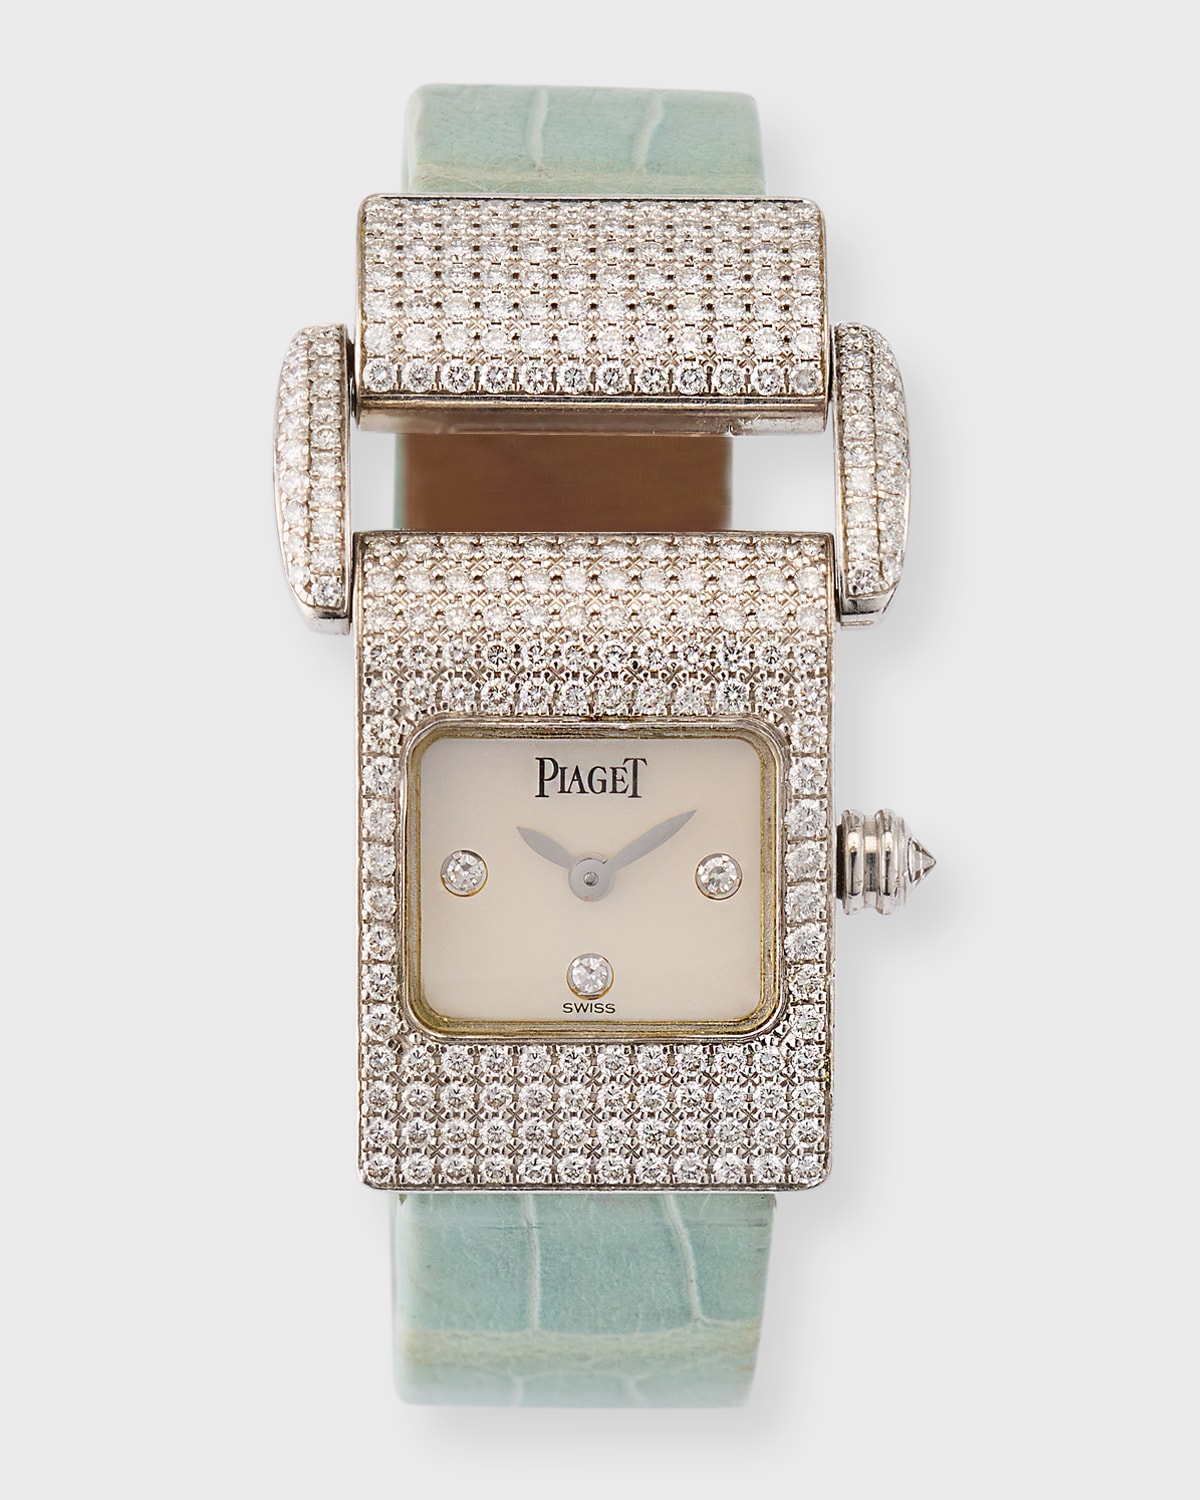 Vintage Watches Piaget Miss Protocole 17mm Watch In Green